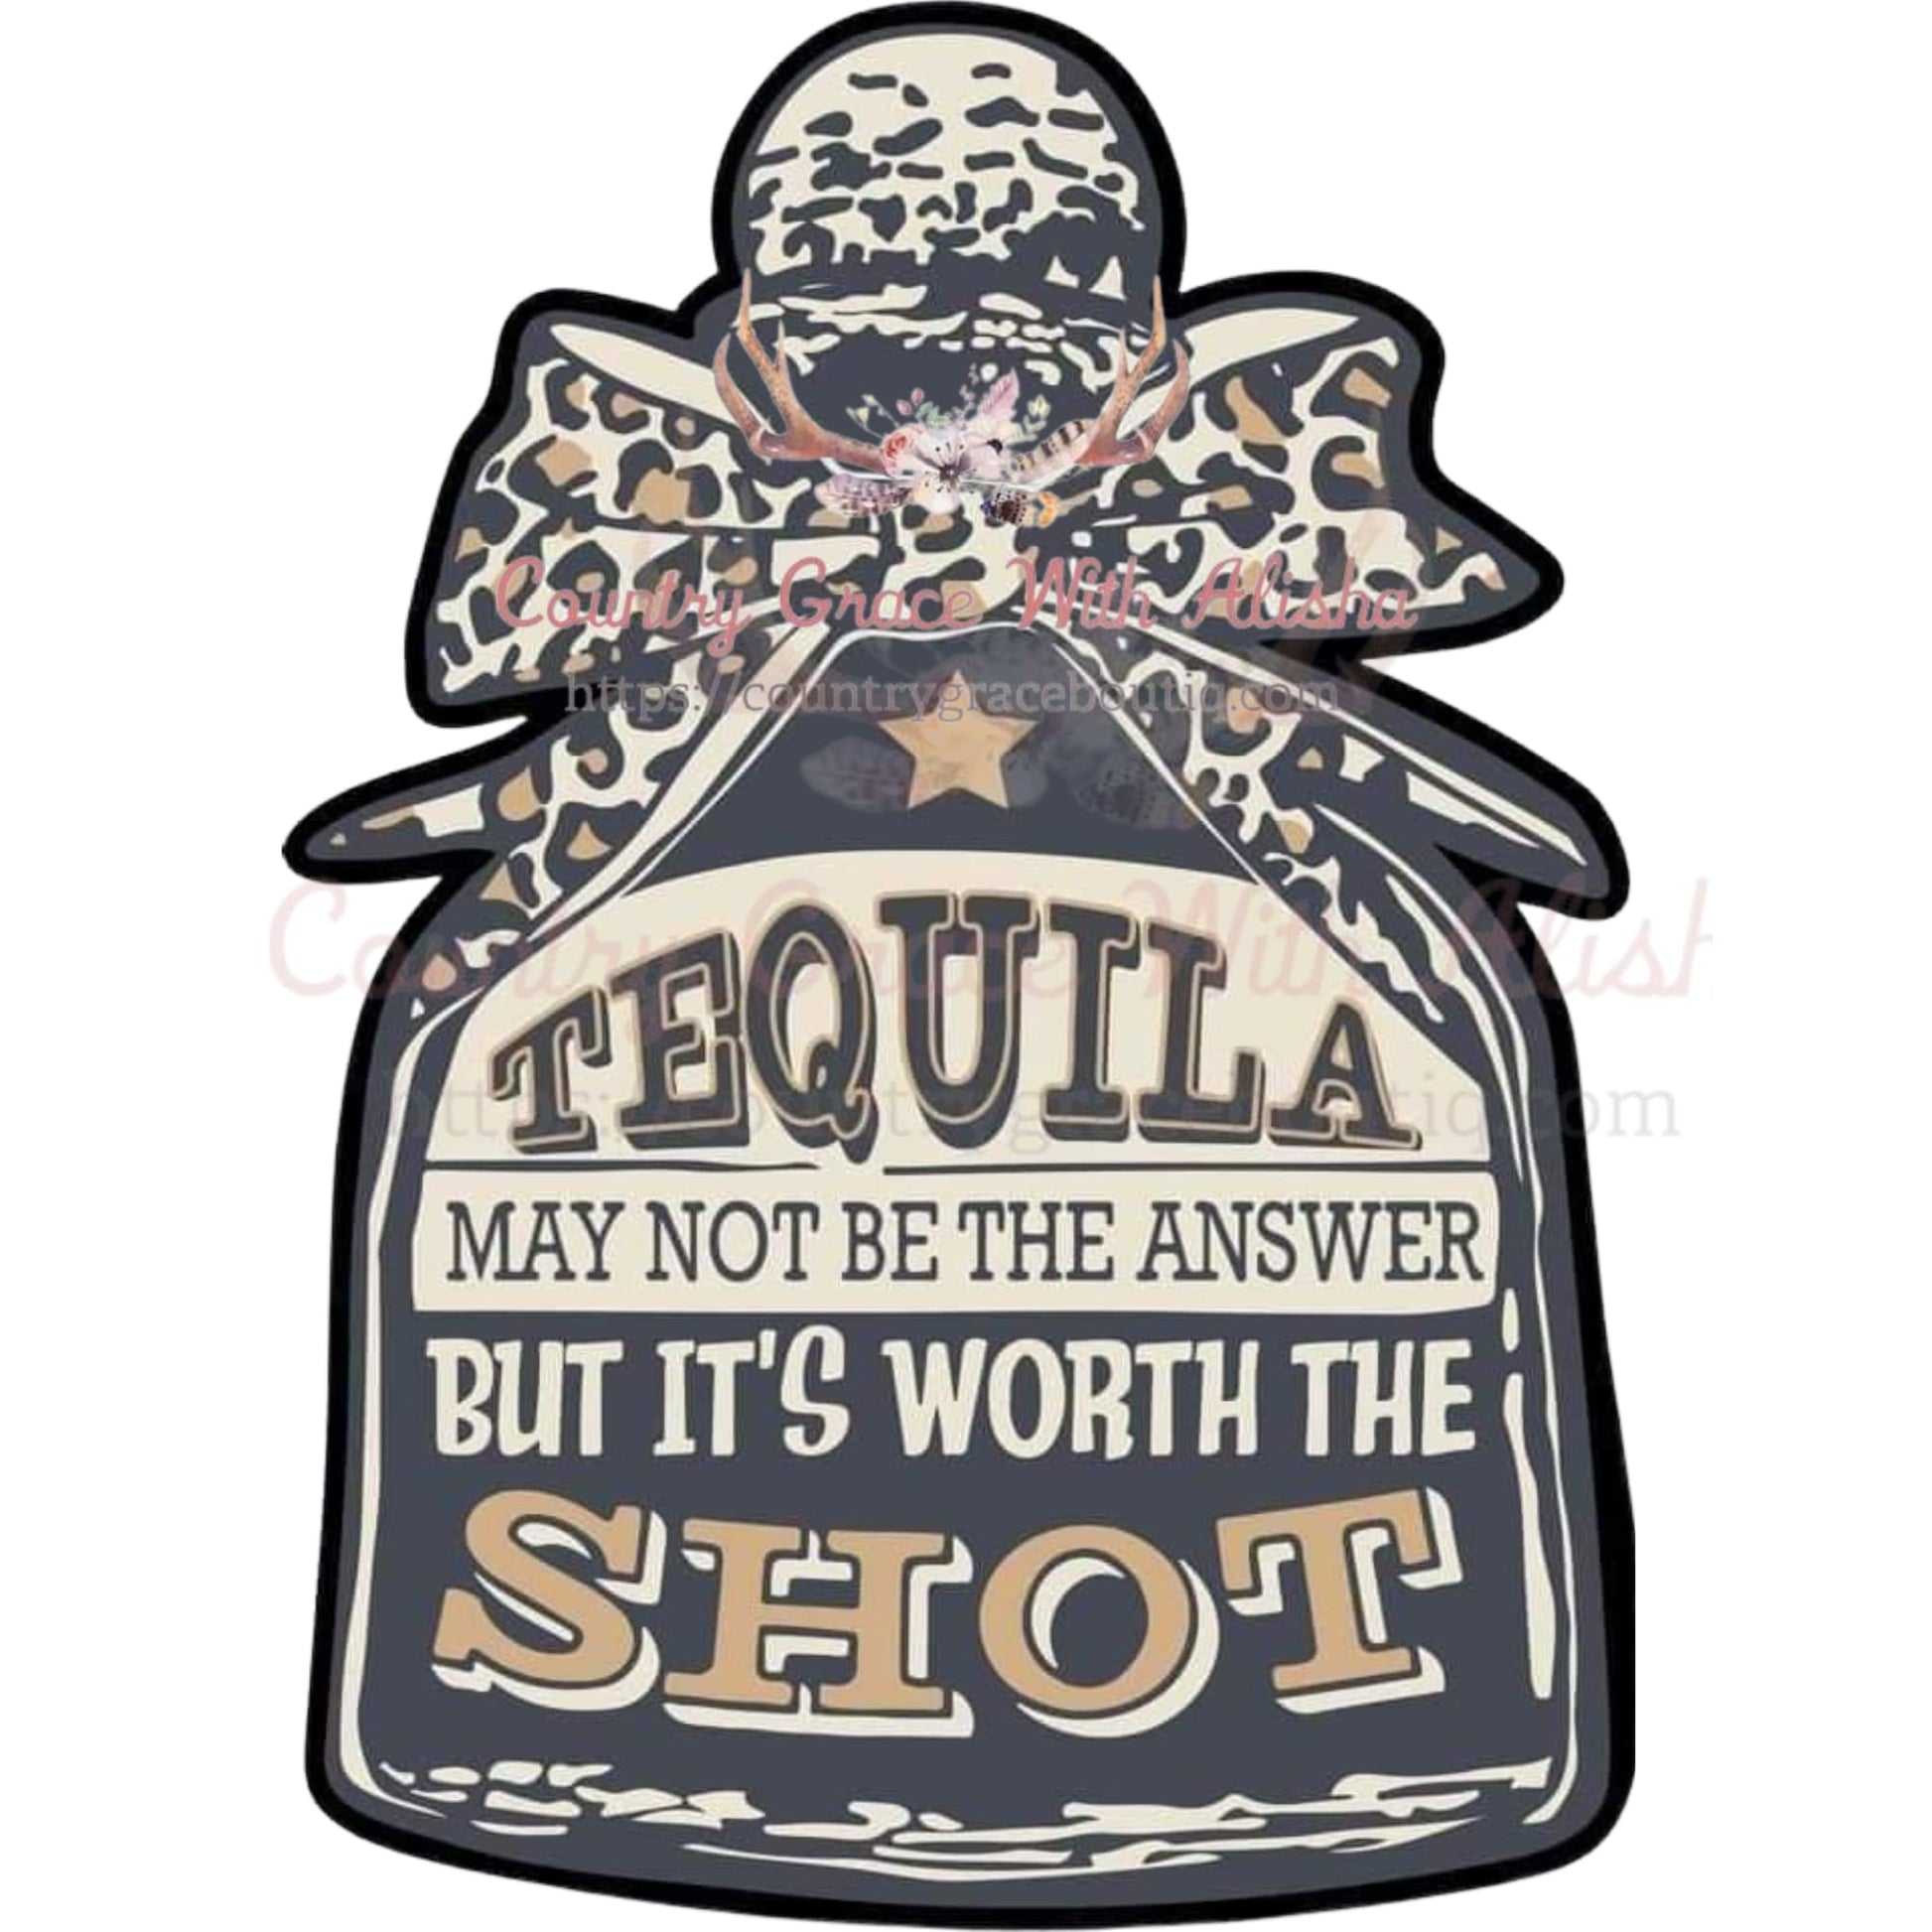 Tequila Shot Sublimation Transfer - Sub $1.50 Country Grace 